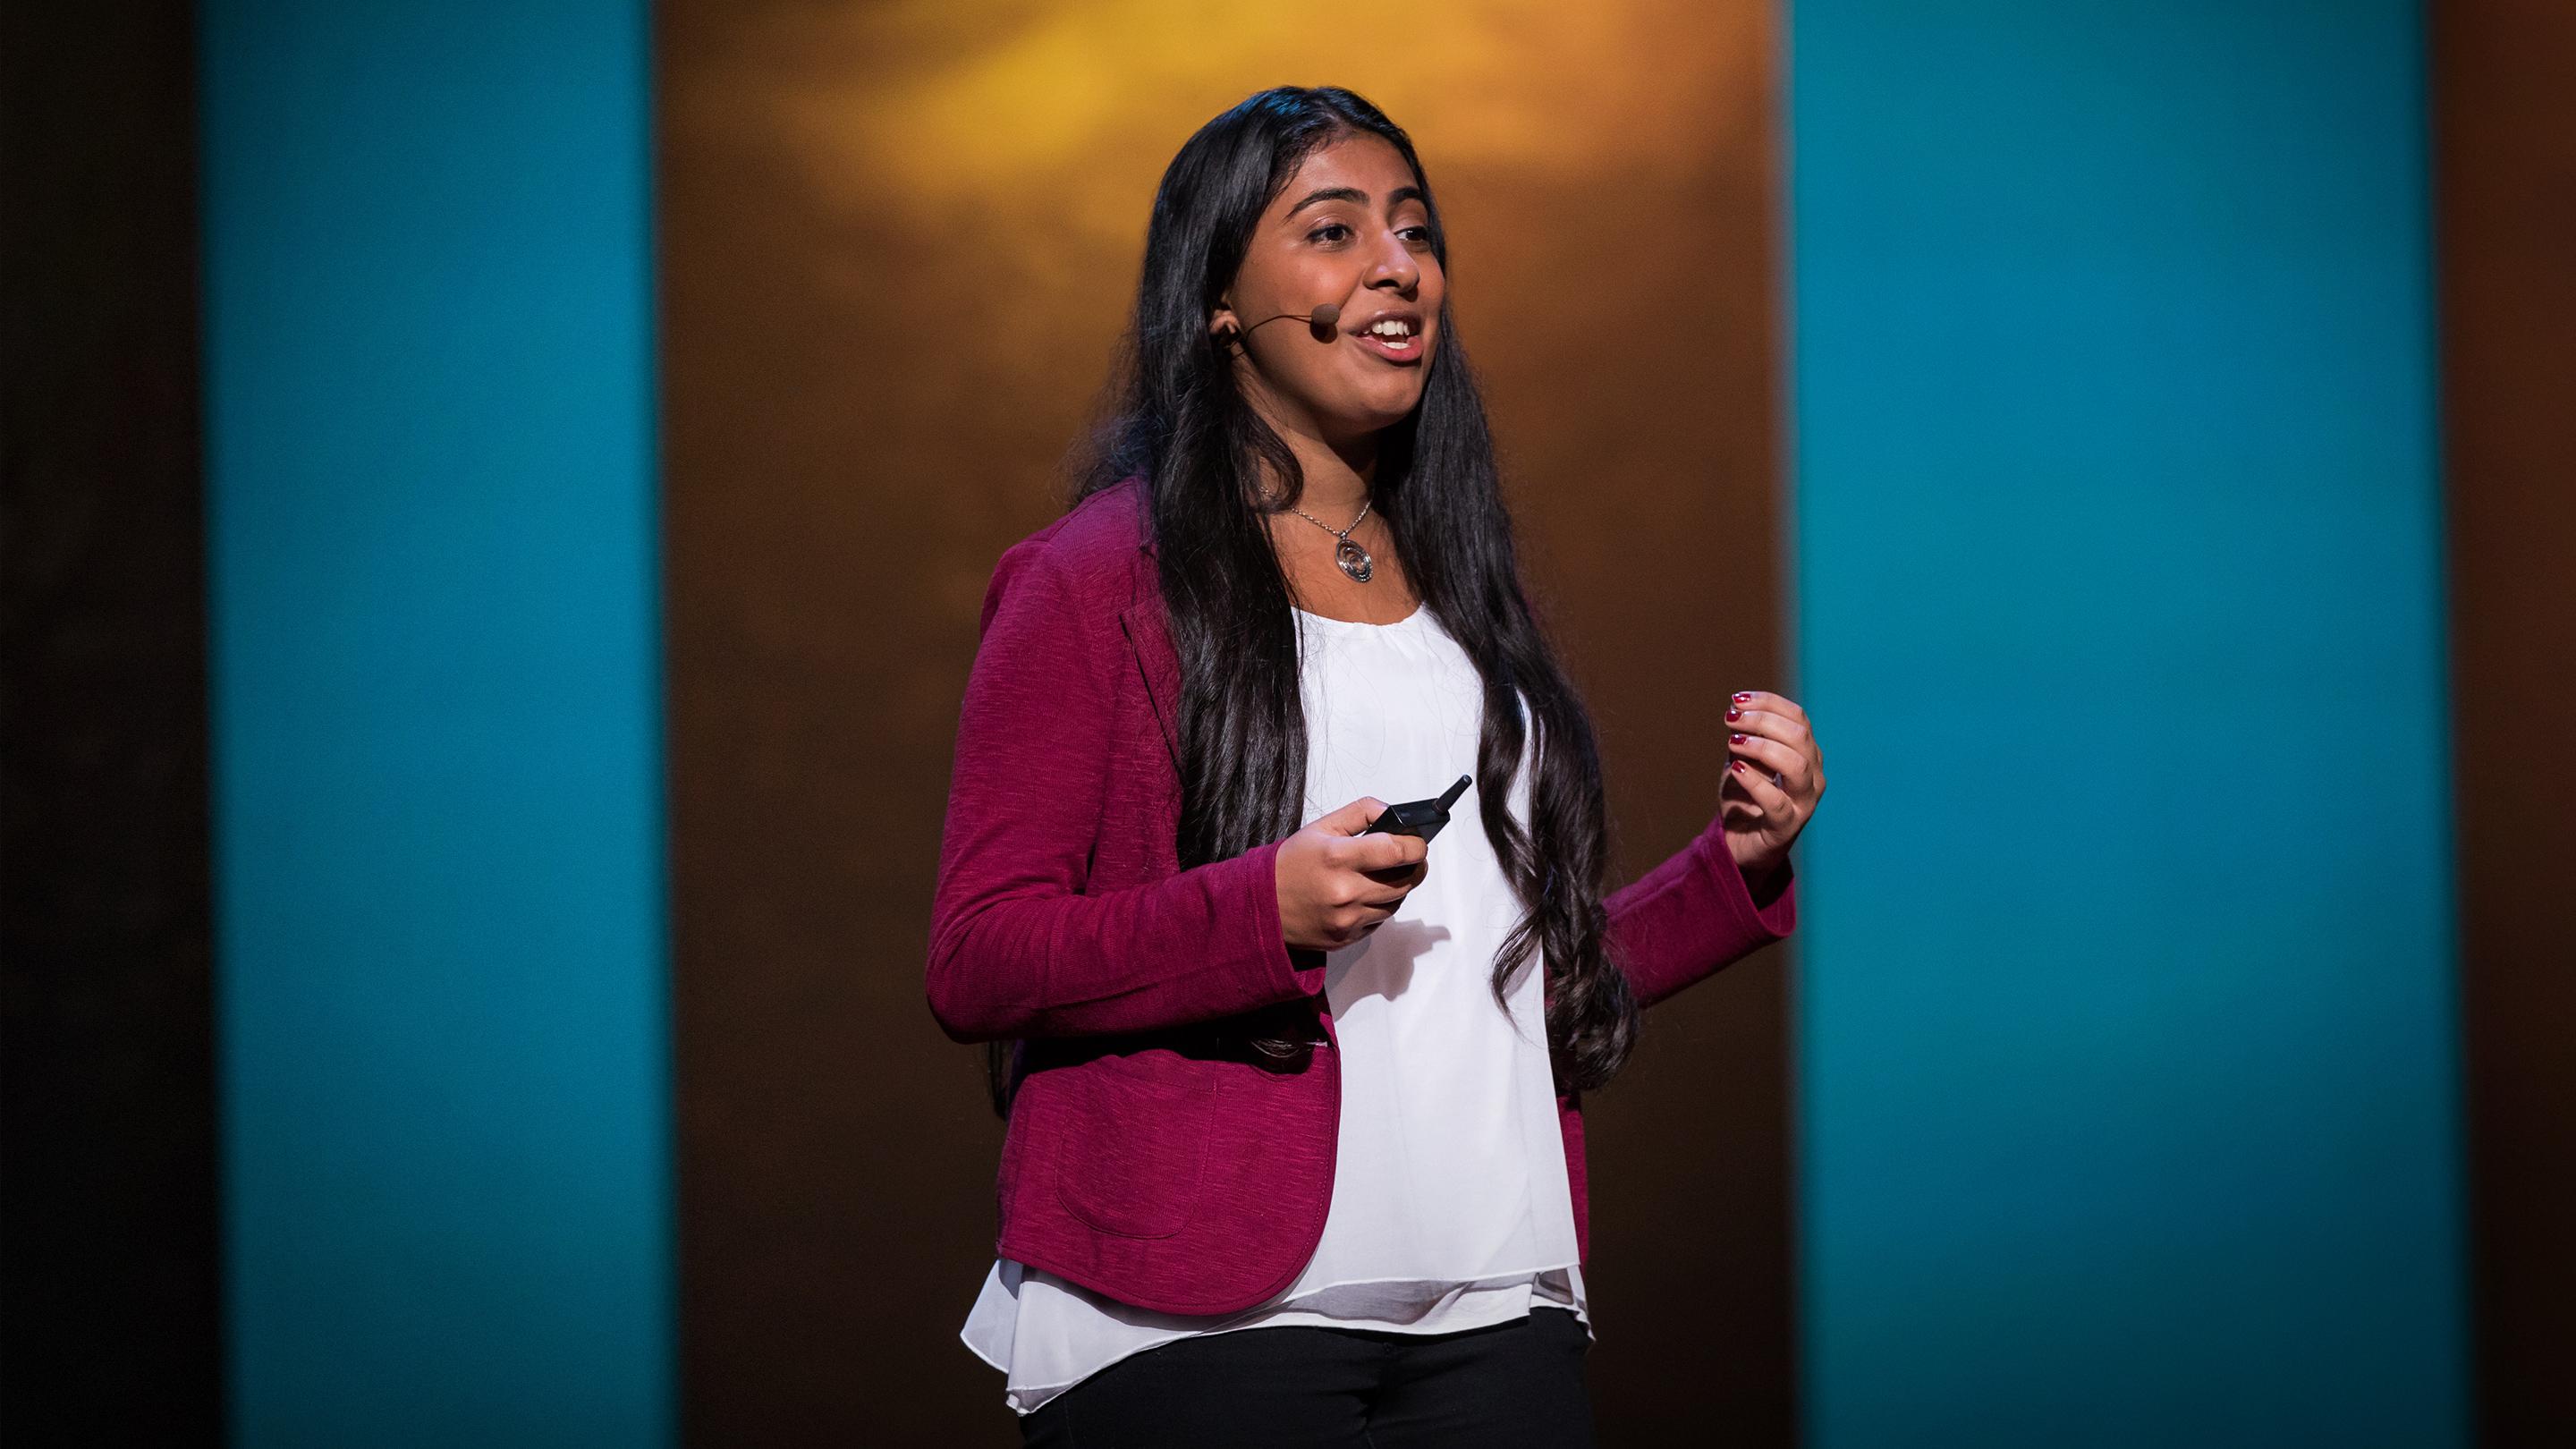 A young scientist’s quest for clean water | Deepika Kurup